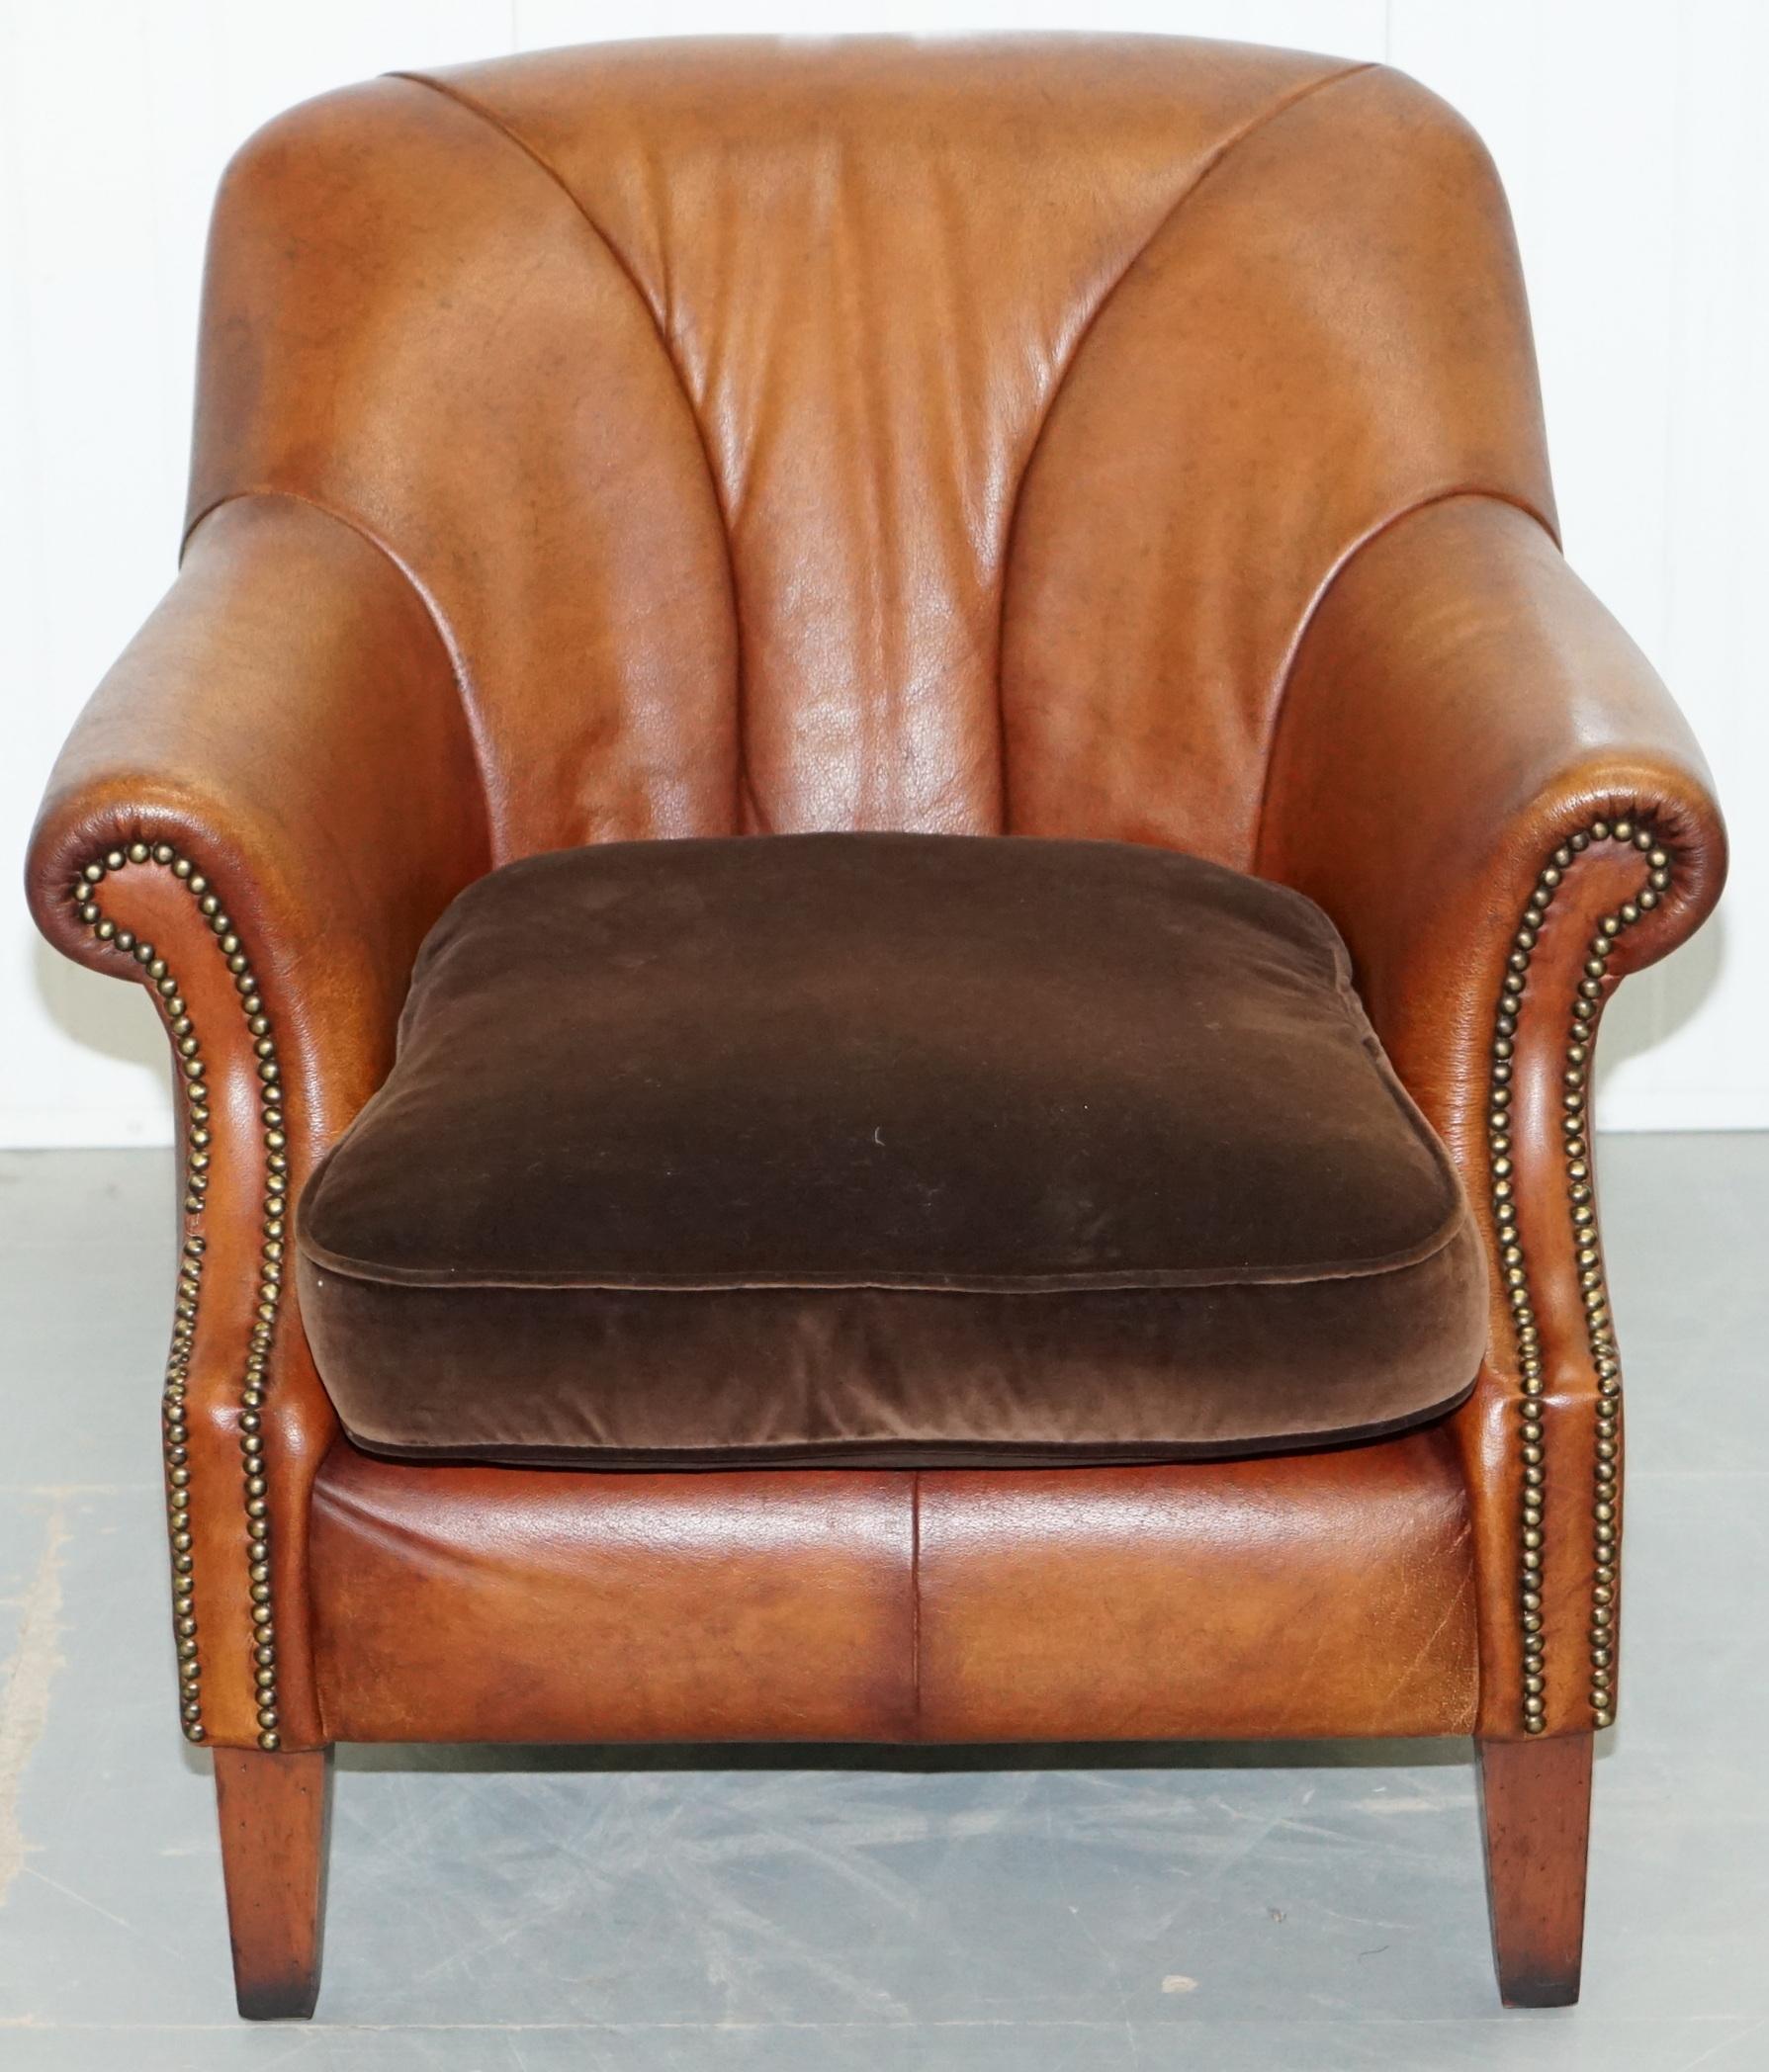 We are delighted to offer for sale this lovely buffalo leather shell back armchair with brown velvet feather filled cushion made by Tetrad England and retailed through John Lewis

A very popular and now discontinued chair, the buffalo leather is